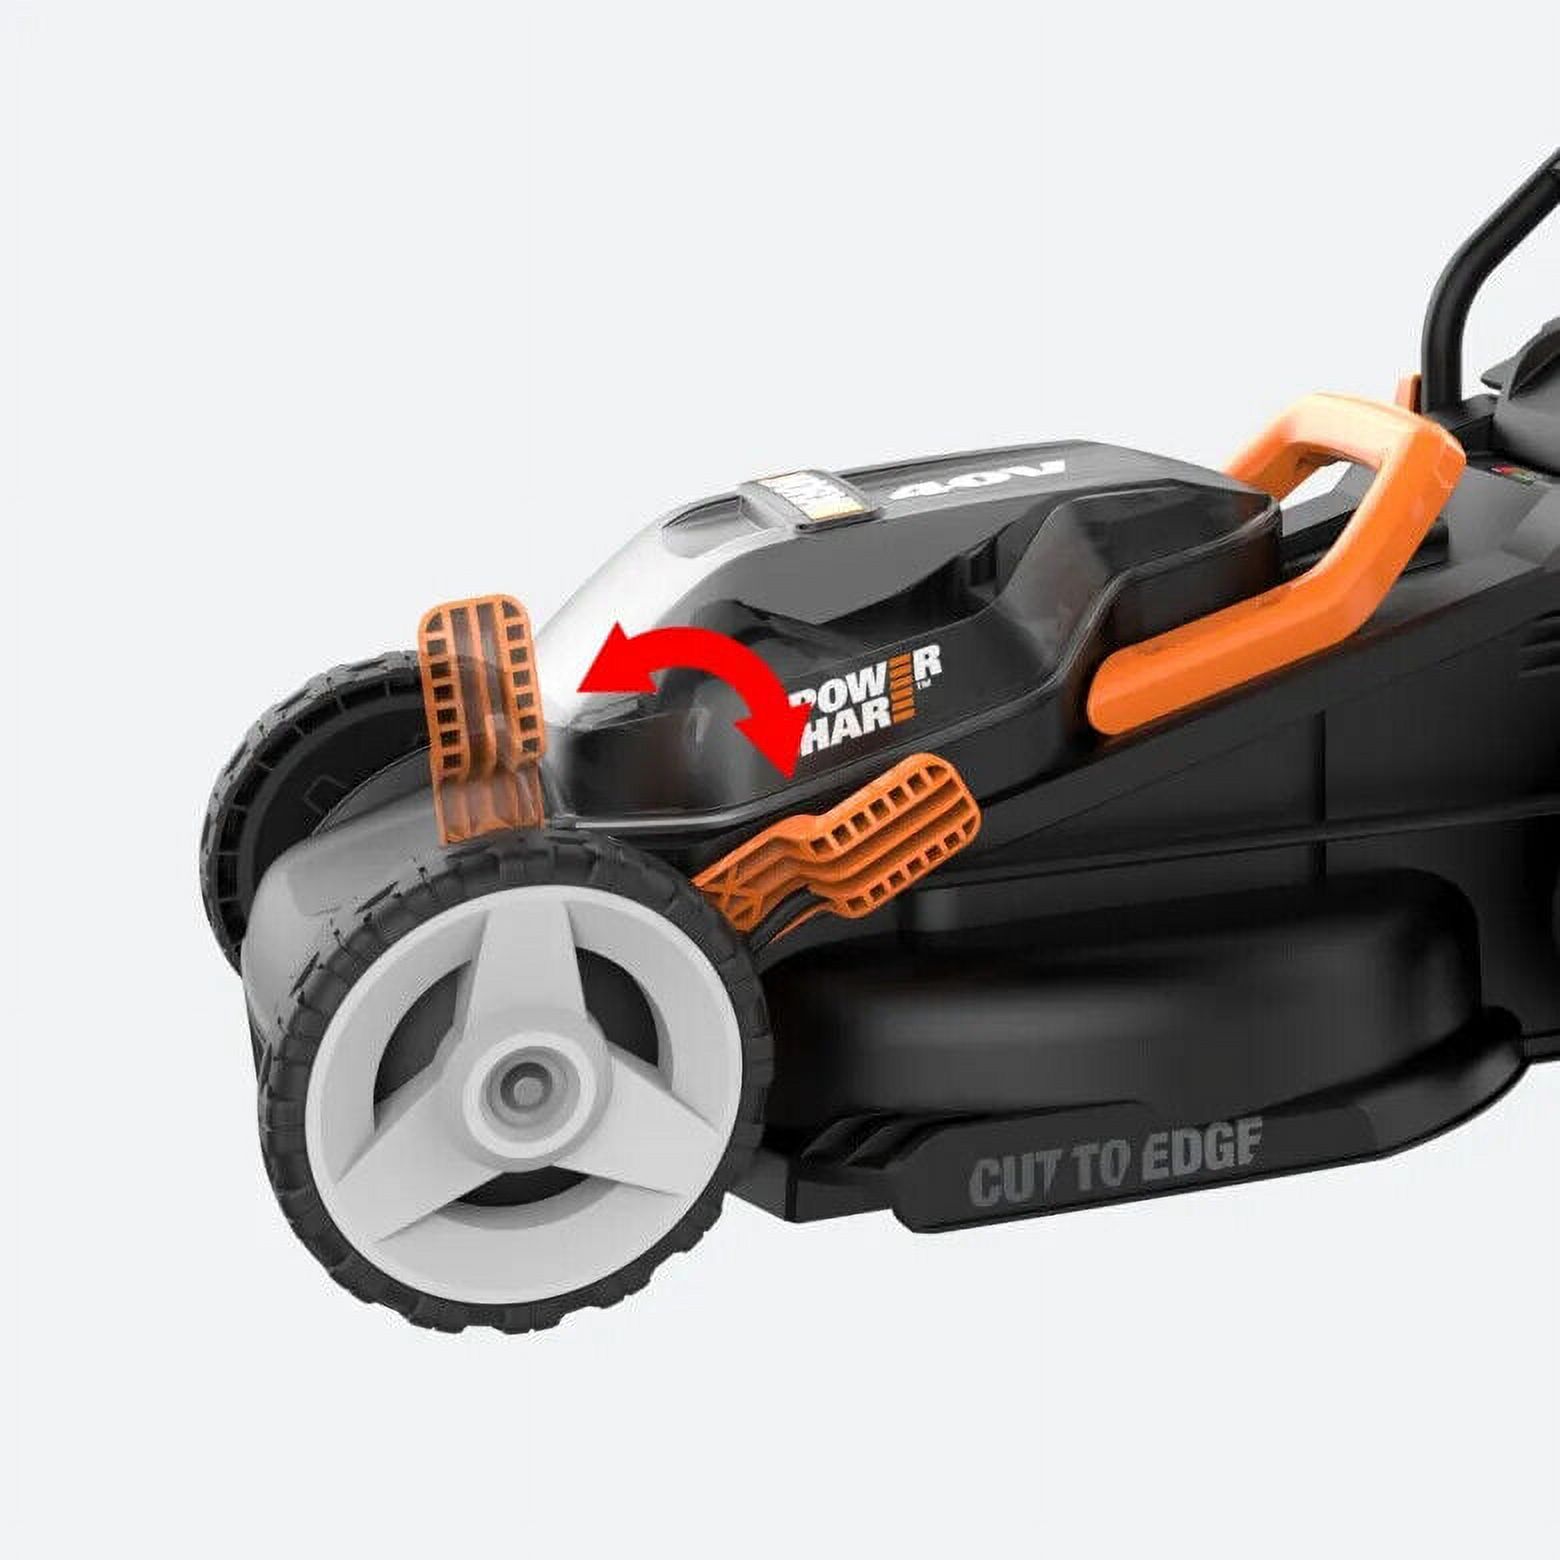 Worx WG779.9 40V Power Share 4.0Ah 14" Cordless Lawn Mower (Tool Only) - image 5 of 10